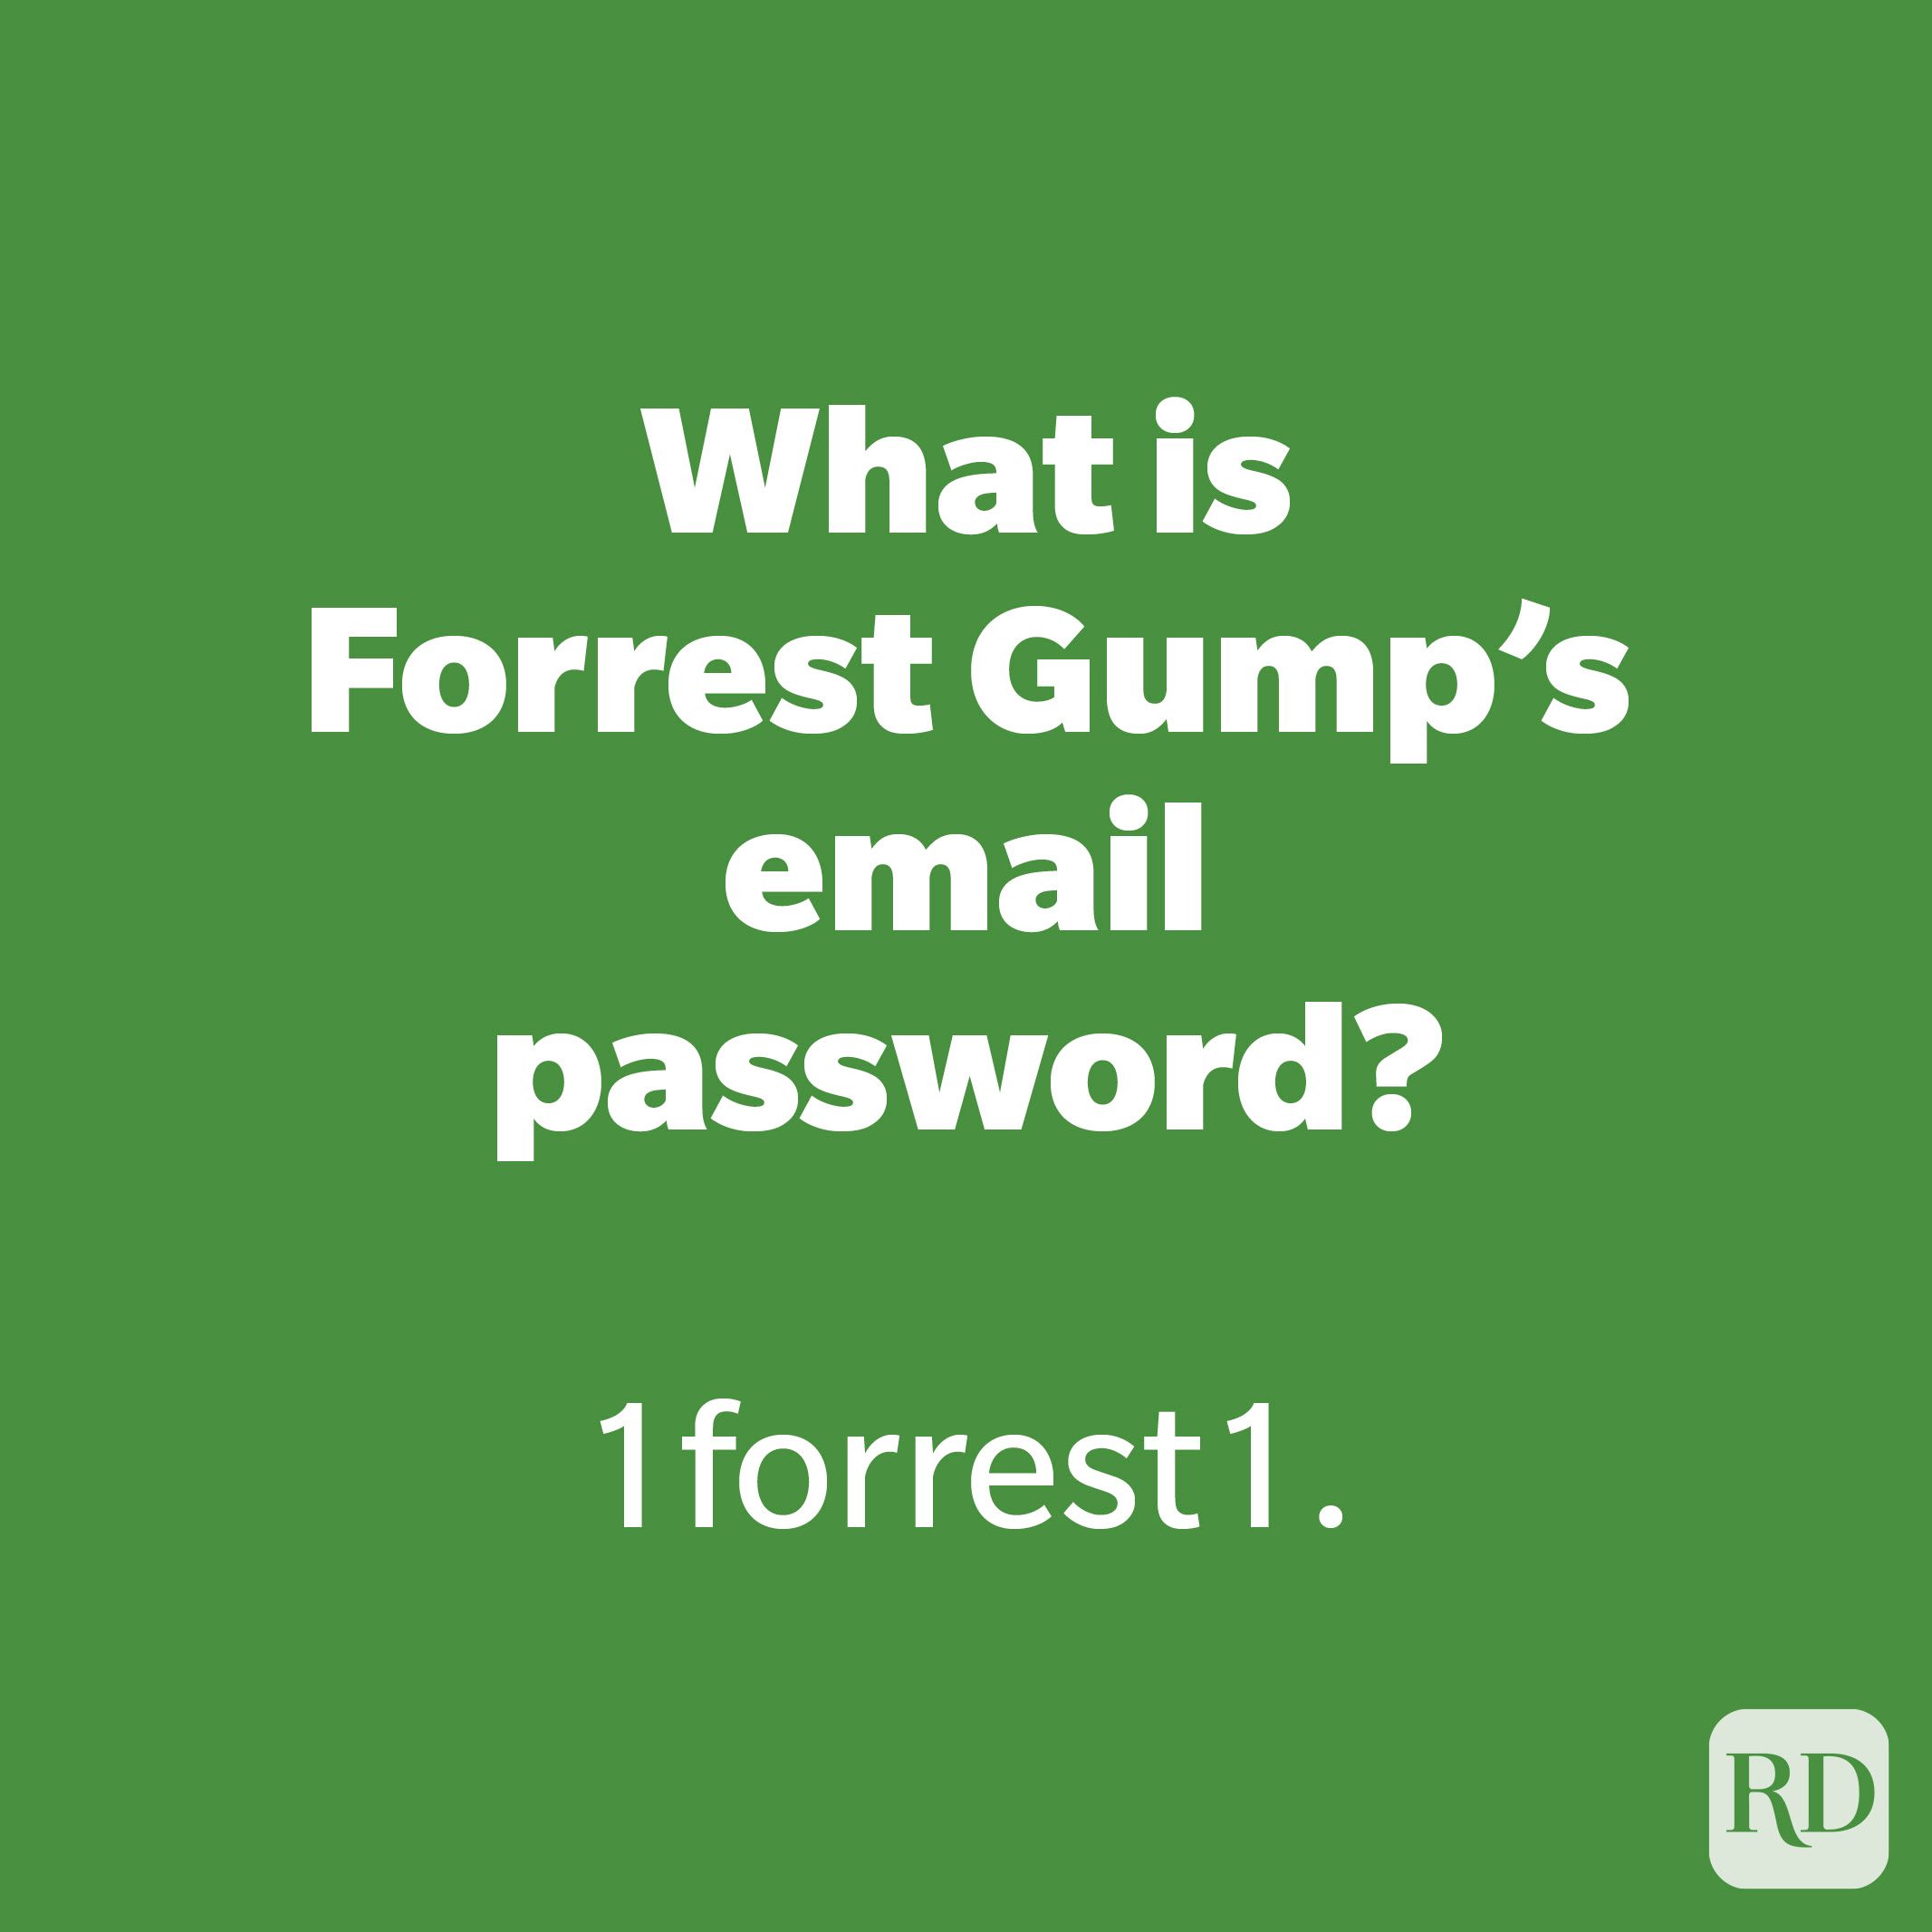 What is Forrest Gump’s email password?